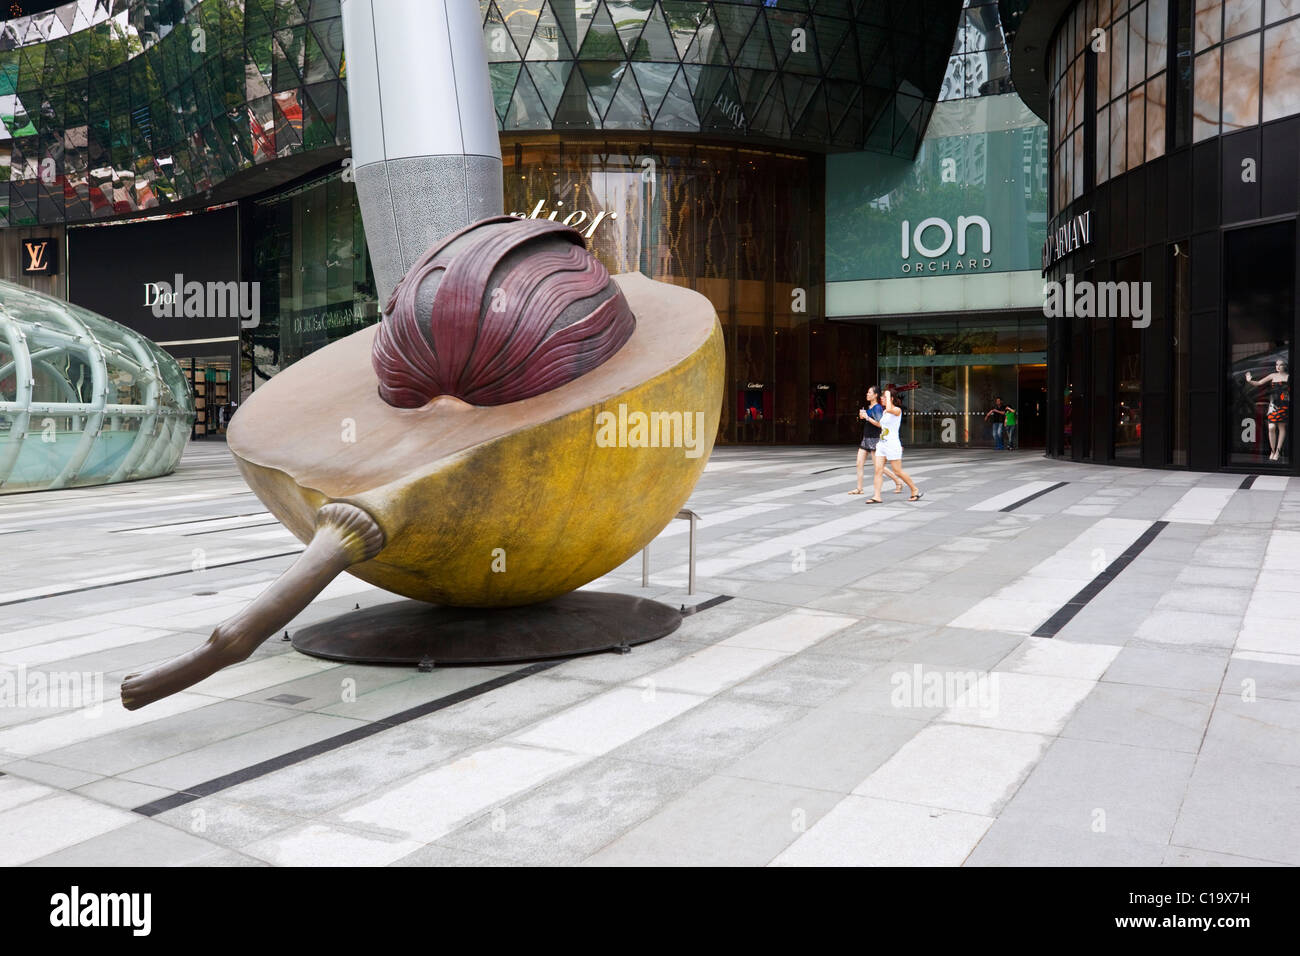 The Nutmeg sculpture by artist Kumari Nahappan at the ION Orchard Mall, Orchard Road, Singapore Stock Photo